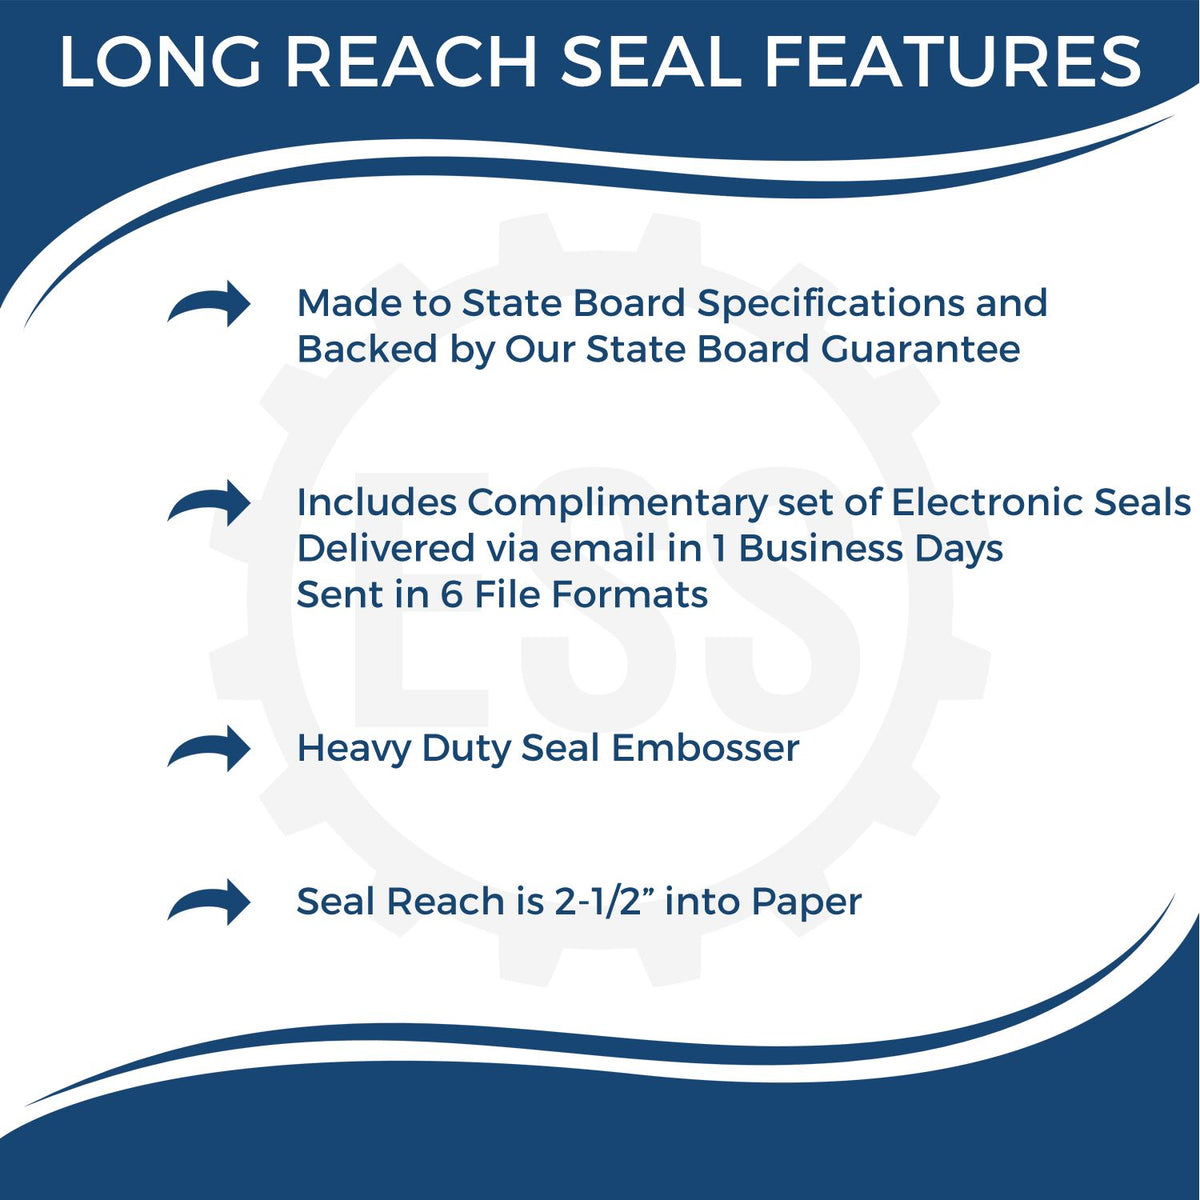 A picture of an infographic highlighting the selling points for the Long Reach Maine PE Seal